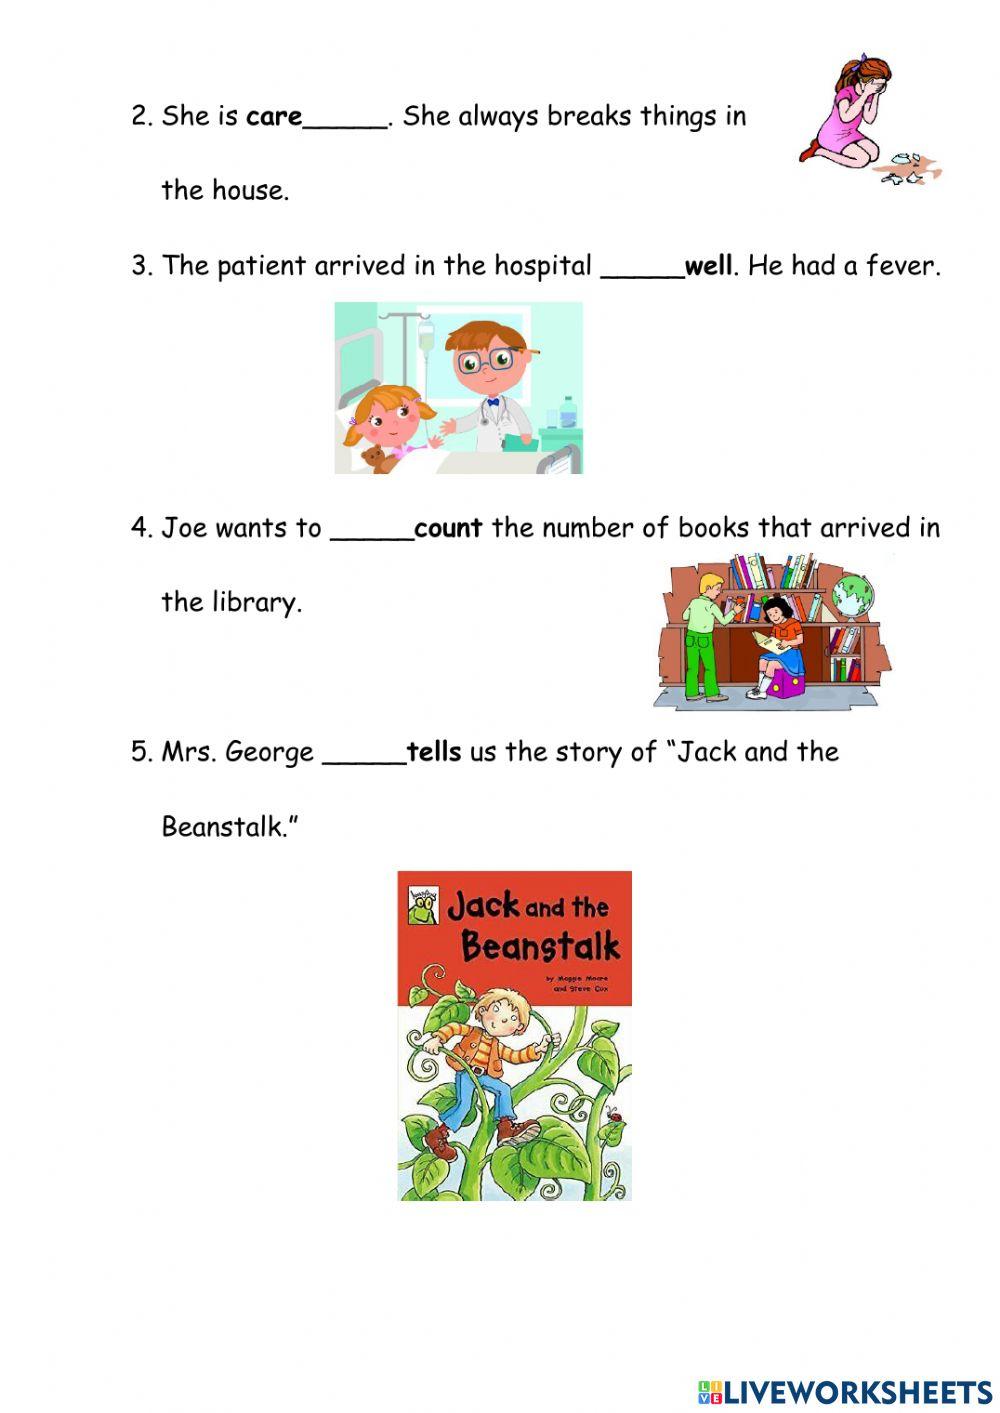 Primary 2 English Formative Assessment 2